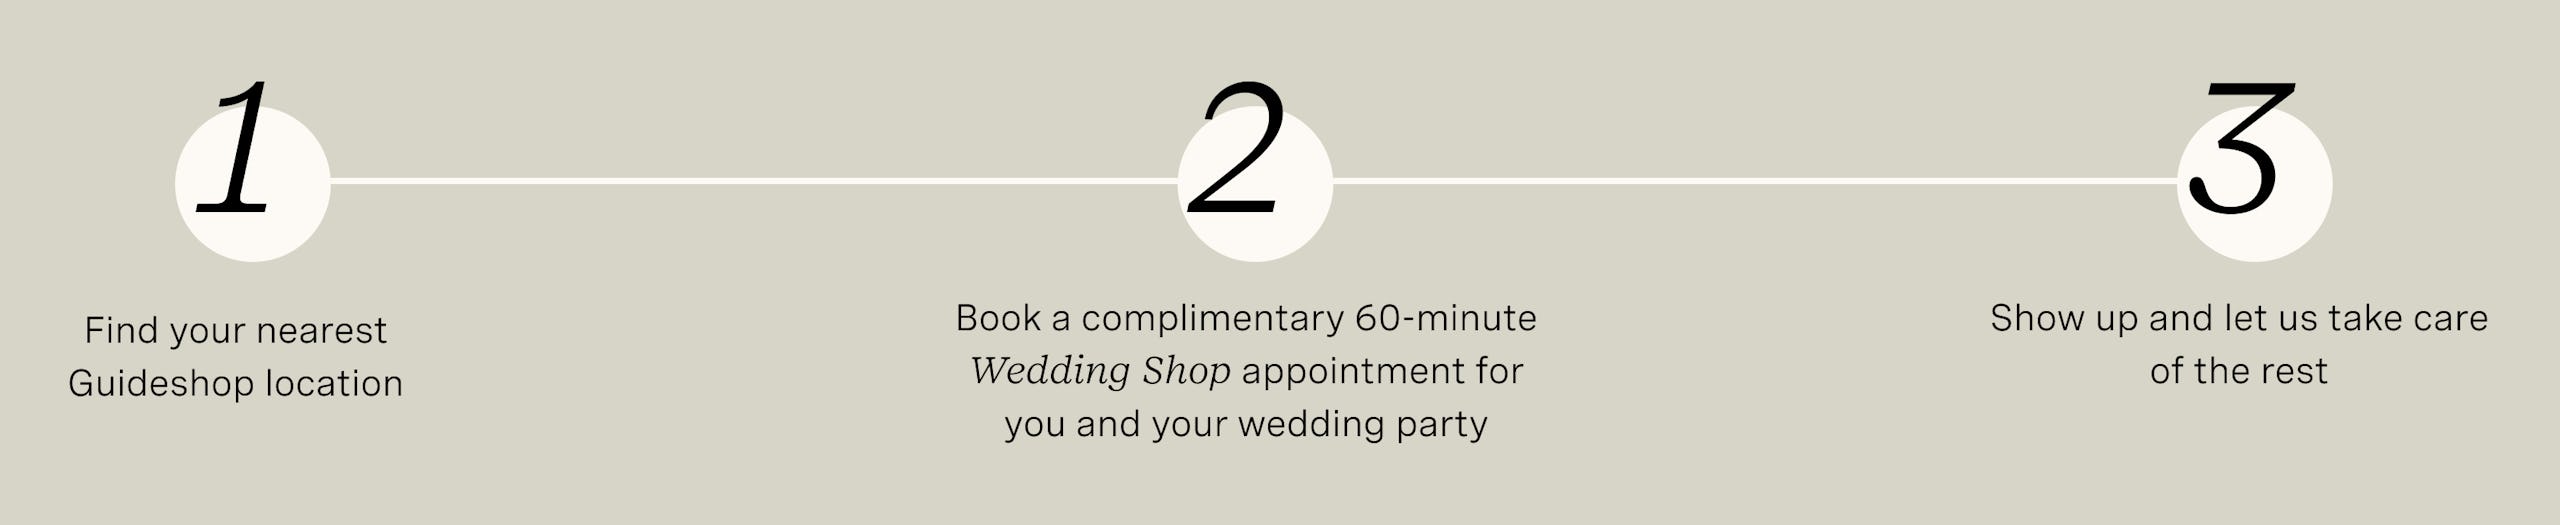 1. Find your nearest Guideshop location 2. Book a free 60-minute Groomshop appointment for you and your wedding party 3. Show up and let us take care of the rest